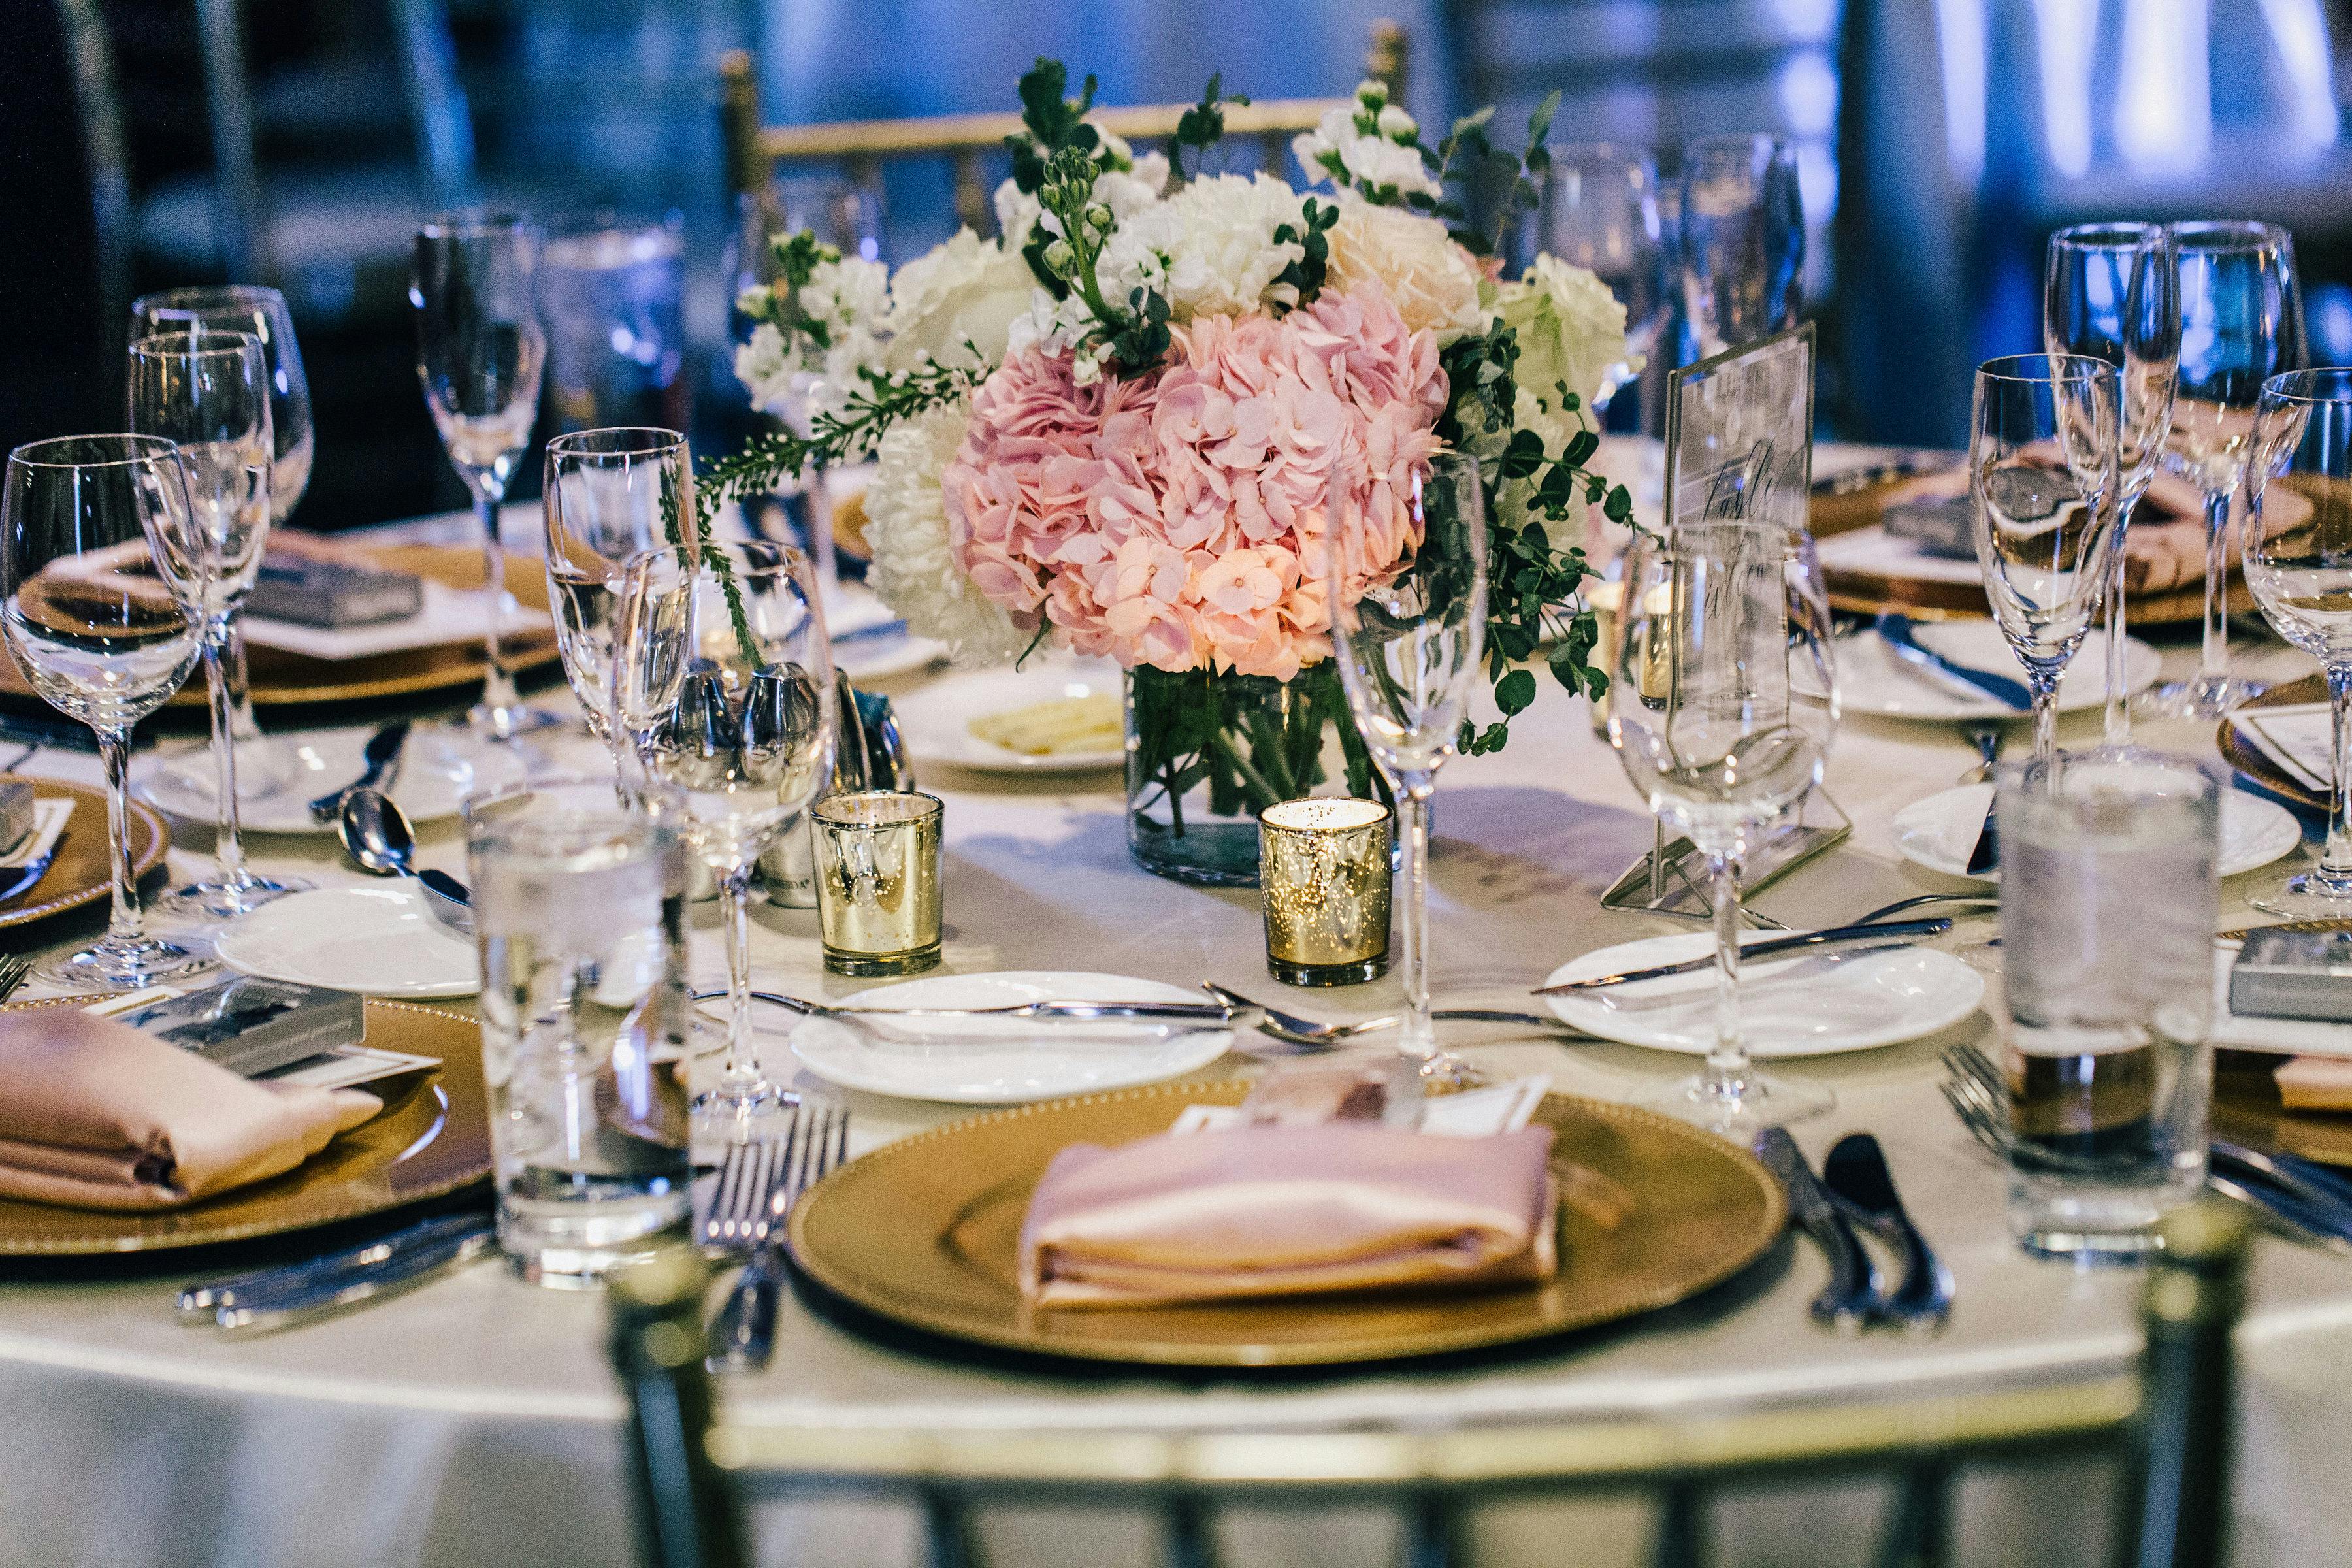 Wedding Table with Pink Hydrangea Wedding Centerpieces, Gold Plates, and Pale-Pink Napkins